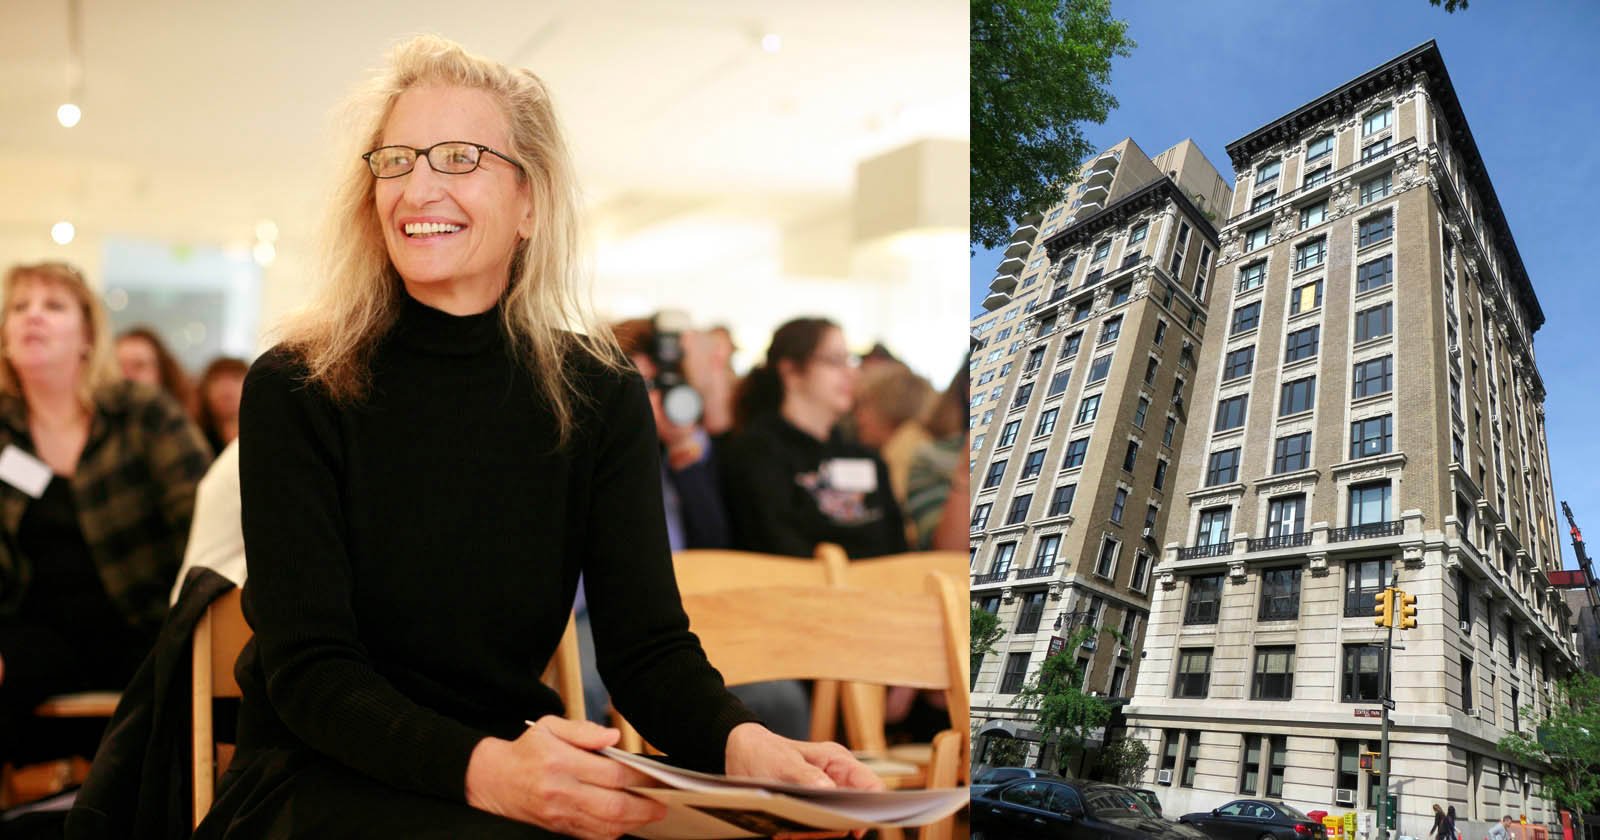 Annie Leibovitz's Central Park W. home hits the market for a loss; Explore  price-reduced Classic 5, 6, and 7 homes across NYC